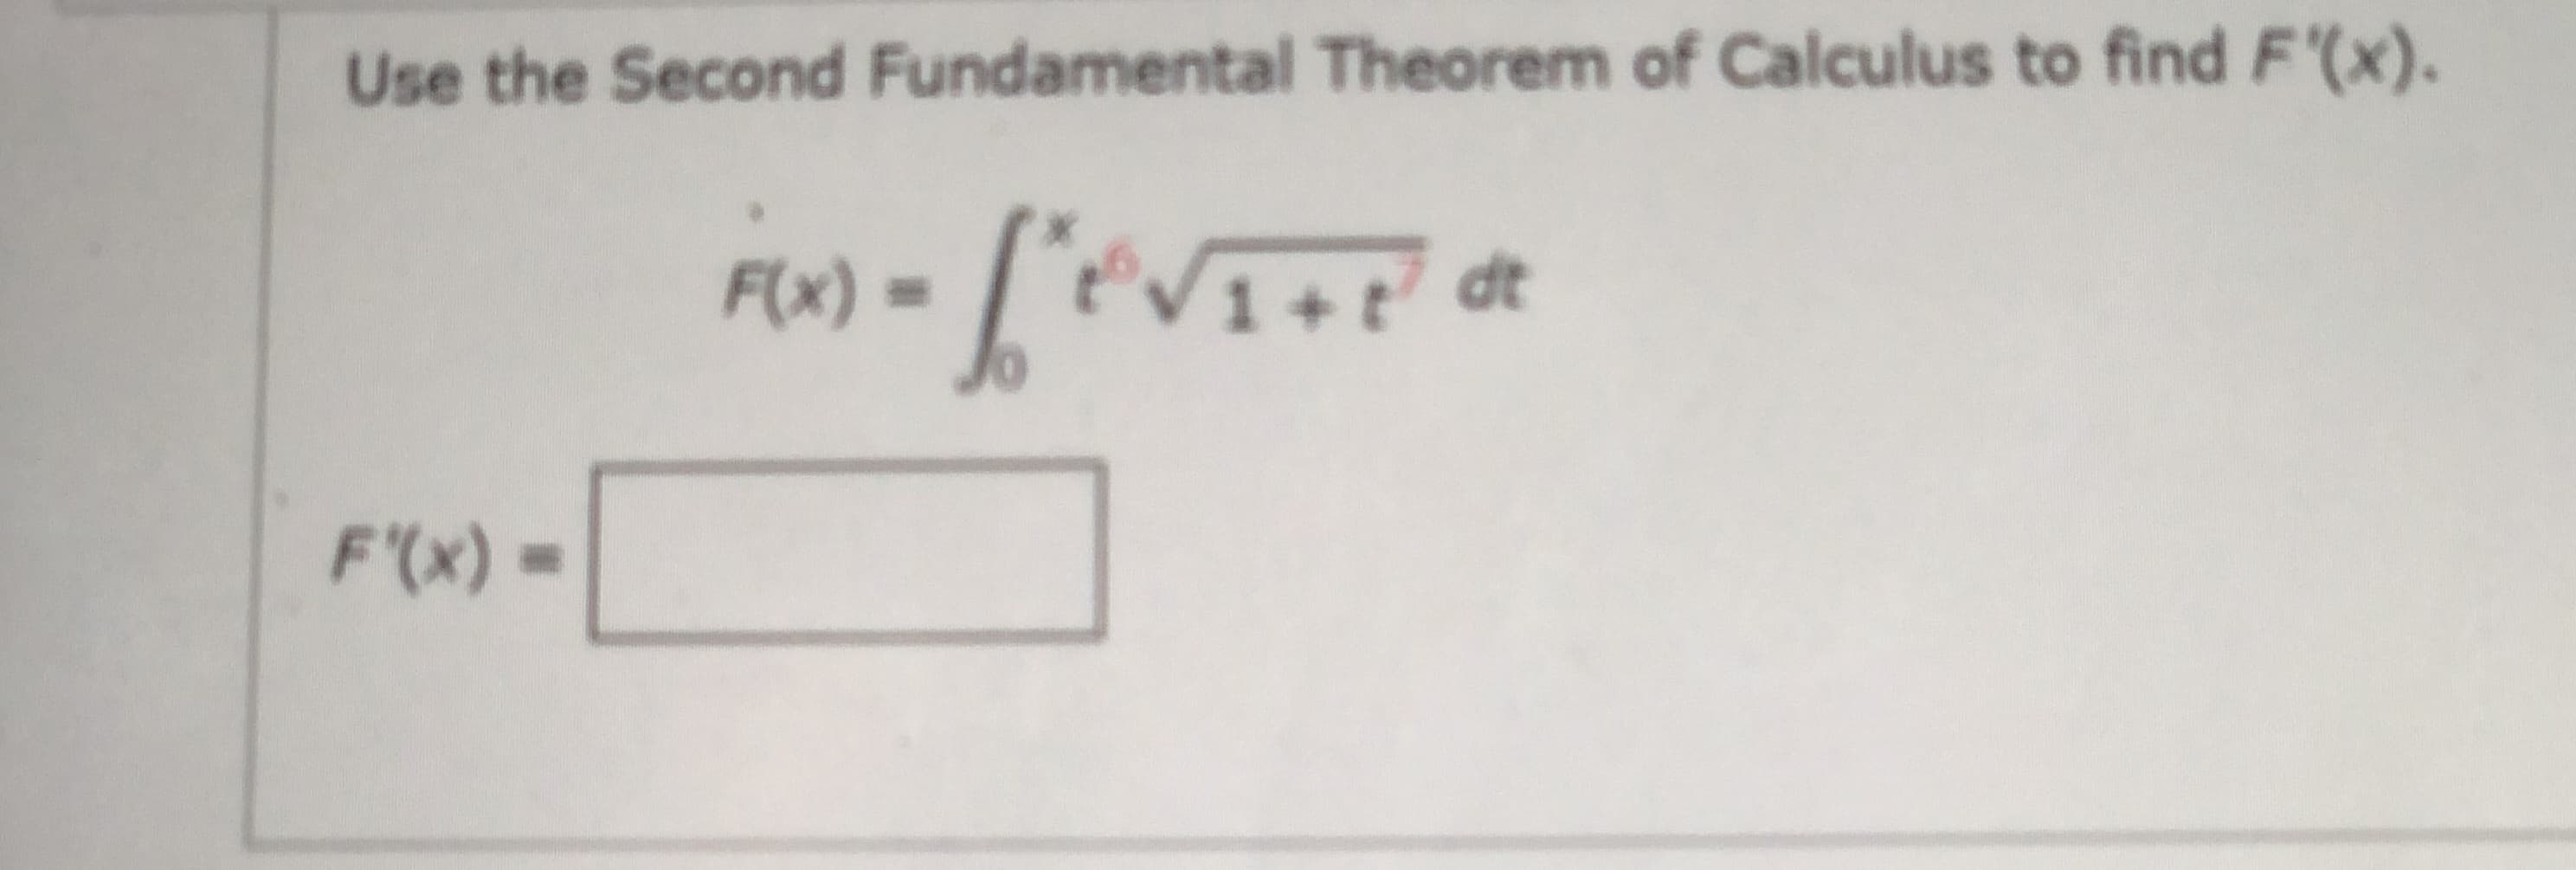 Use the Second Fundamental Theorem of Calculus to find F'(x).
F(x)
1+tdt
F'(x) =
